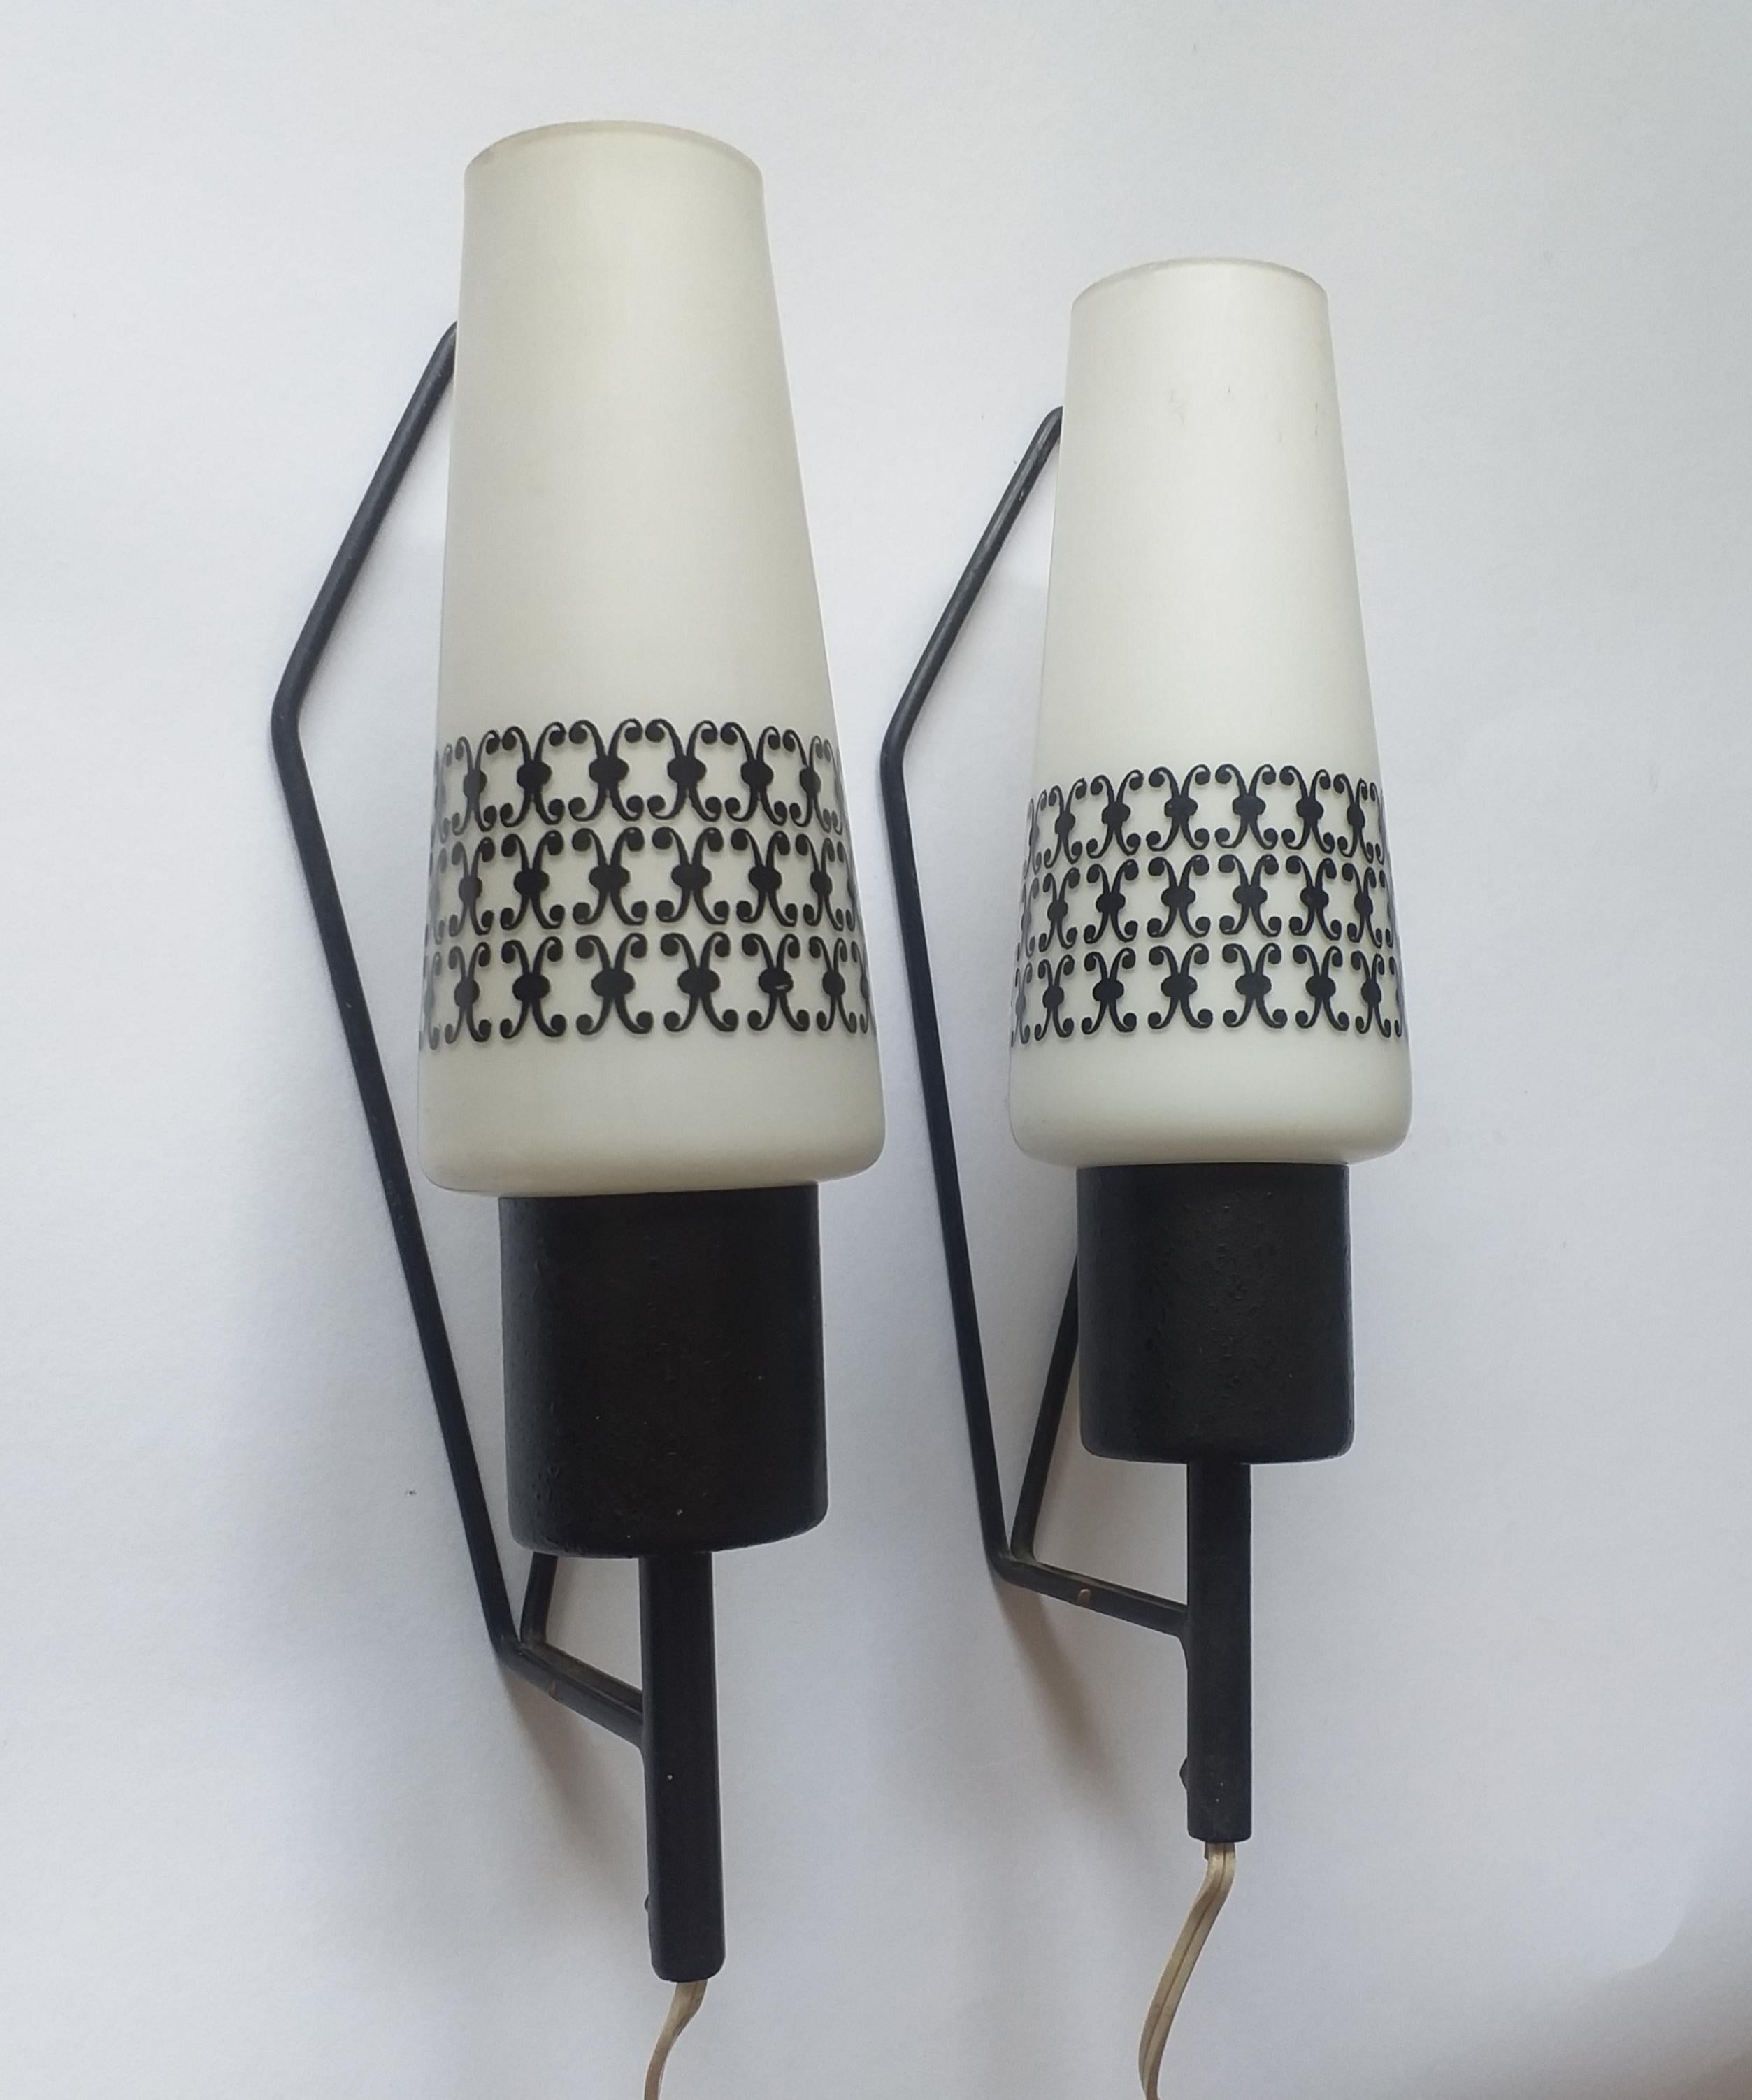 Pair of Midcentury Wall Lamps, 1960s For Sale 2